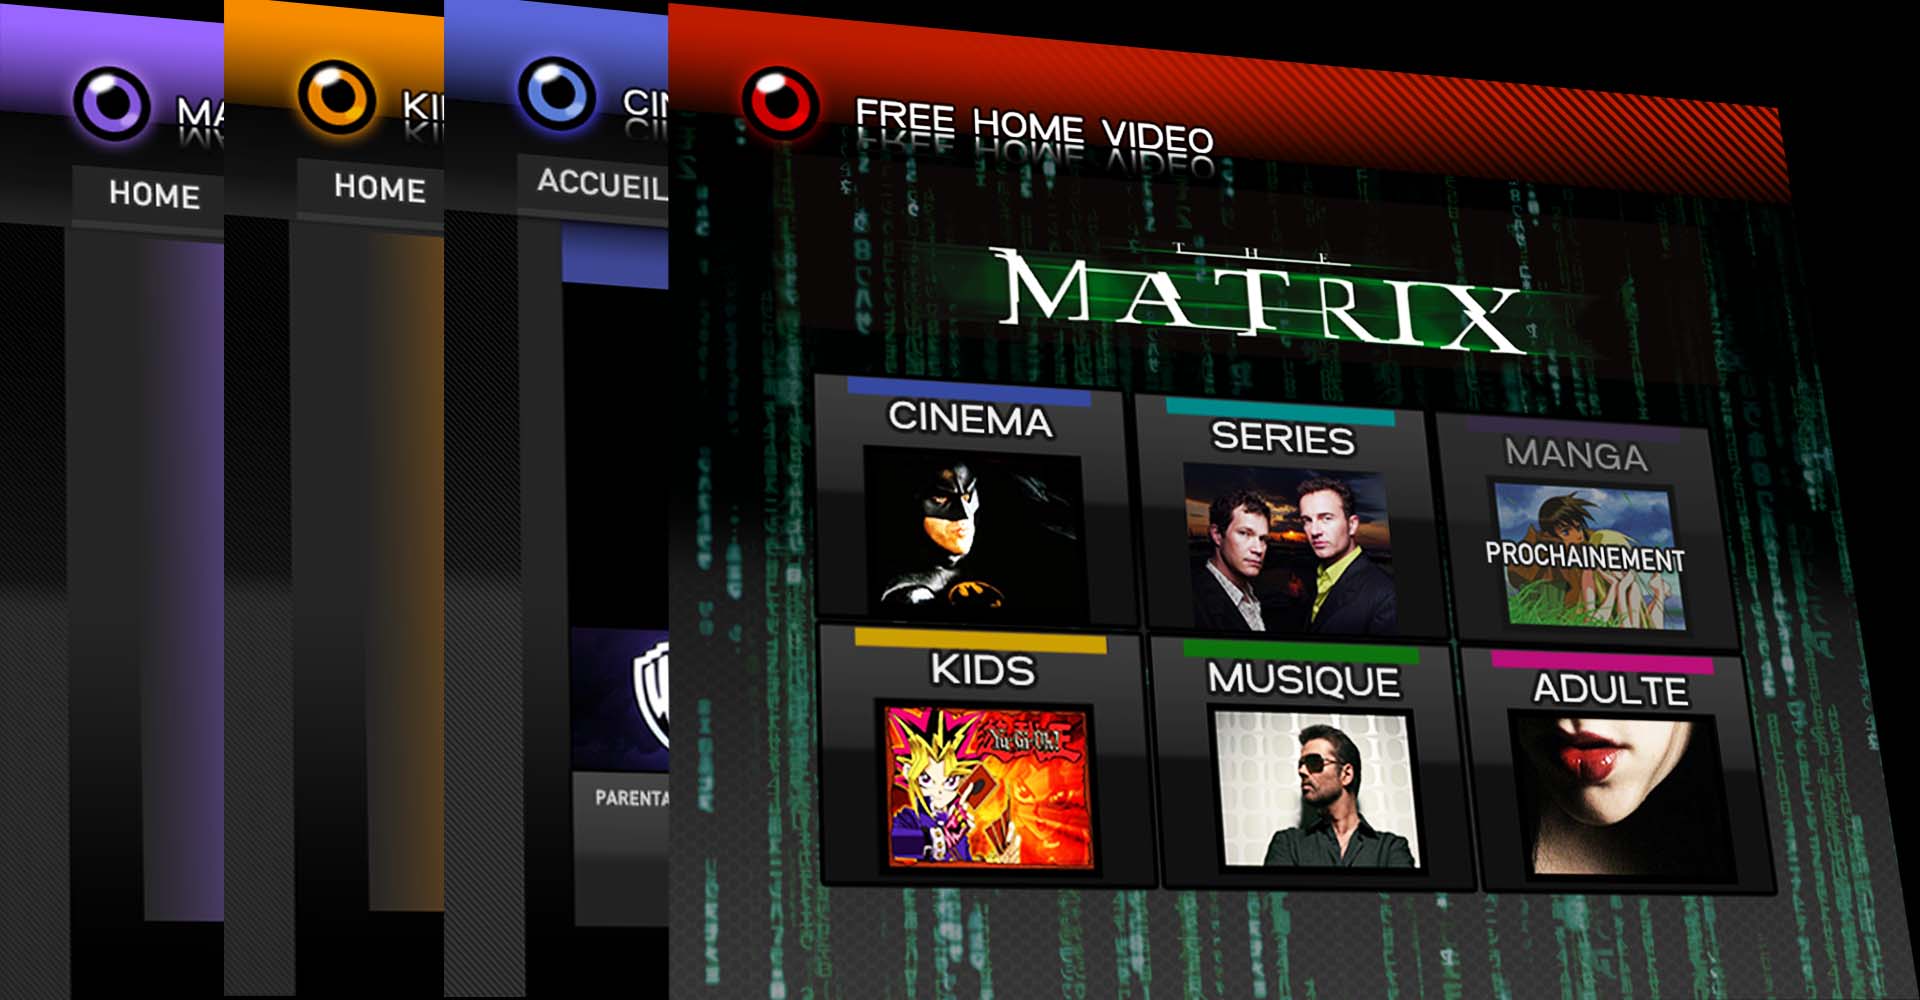 FREE HOME VIDEO VOD service